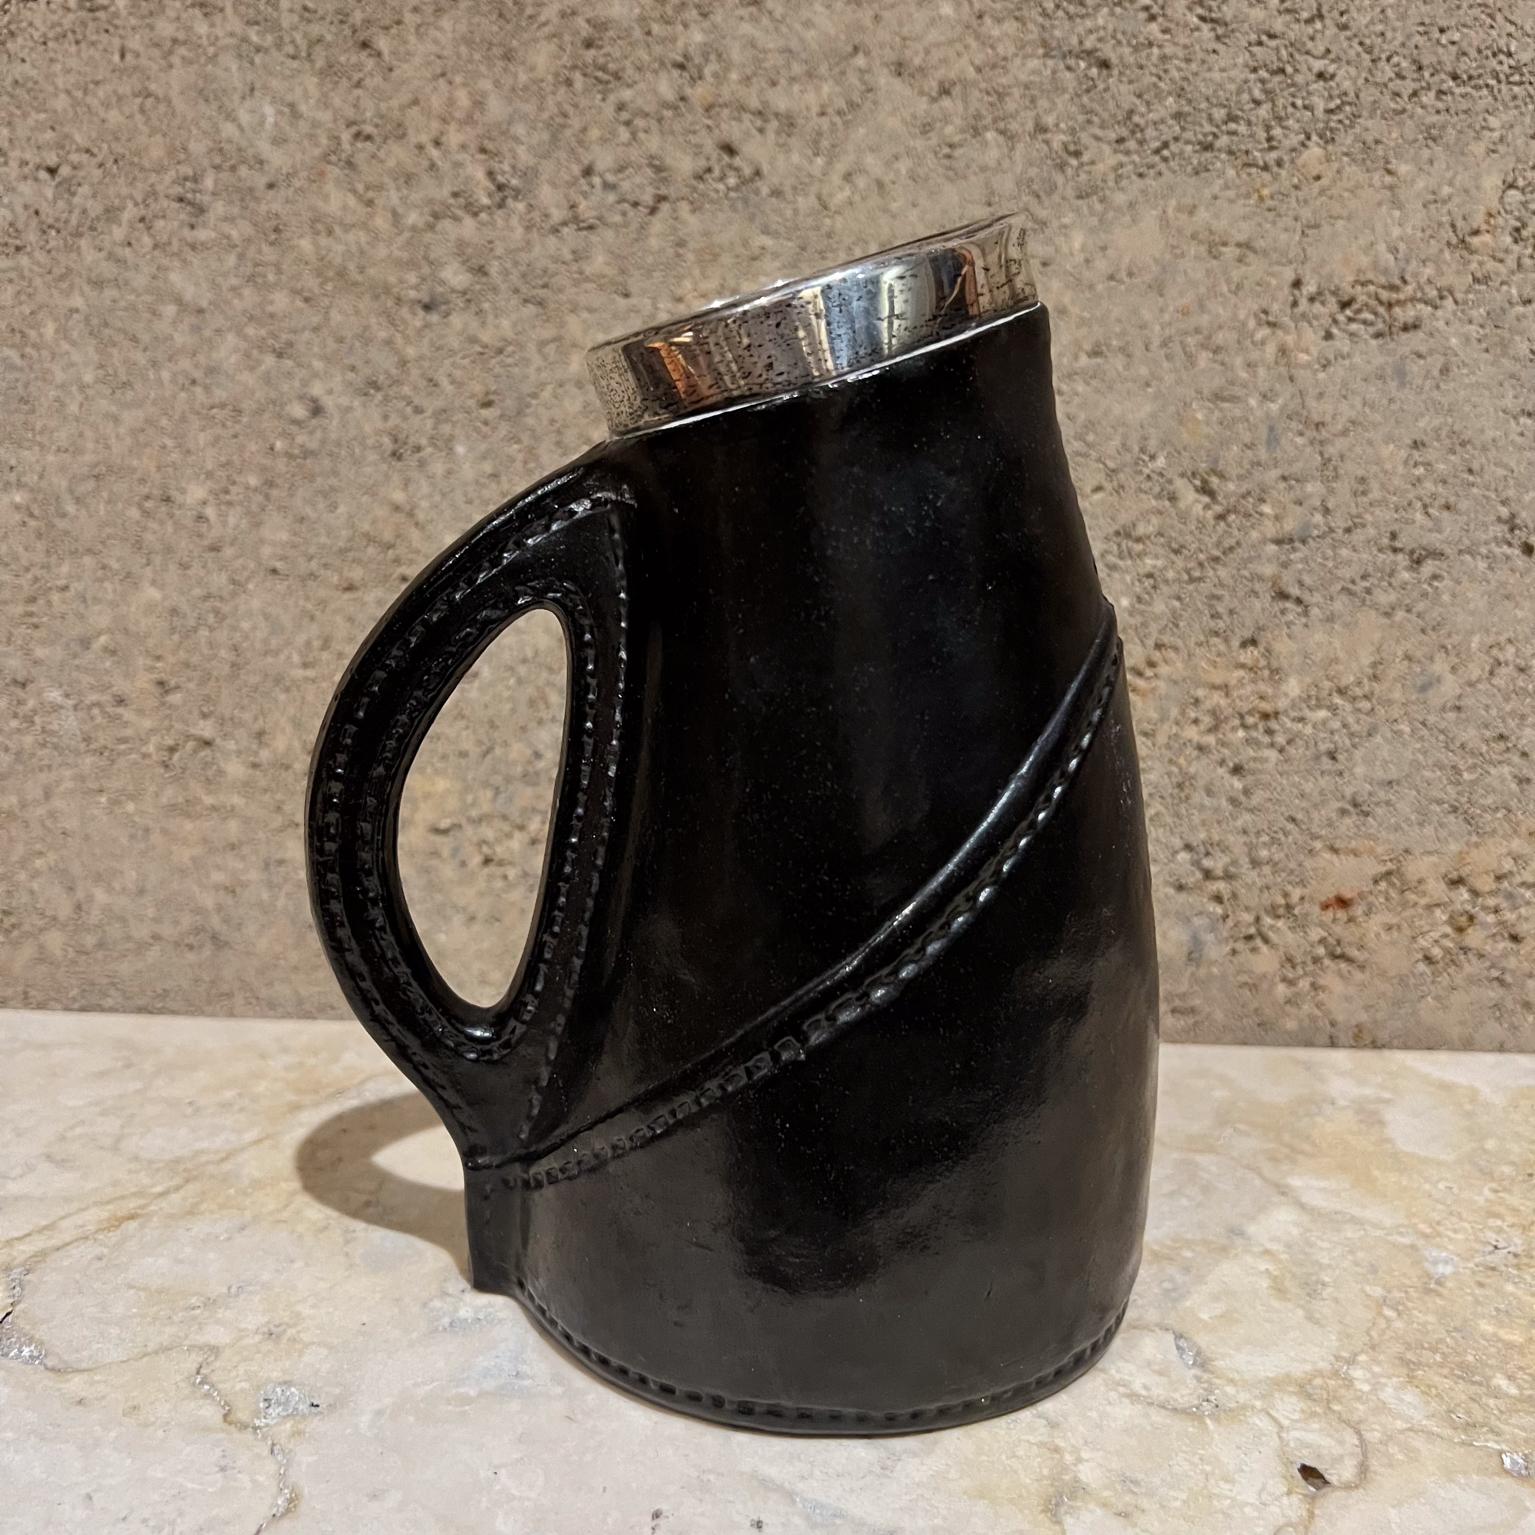 AMBIANIC presents
Late Victorian Silver Mounted Ceramic Pottery Blackjack Pitcher
Doulton Lambeth mark of Saunders & Shepherd London 1894
7 h x 5.25 d x 3.5 w
Preowned original vintage condition
Patinated wear.
See all images for details.